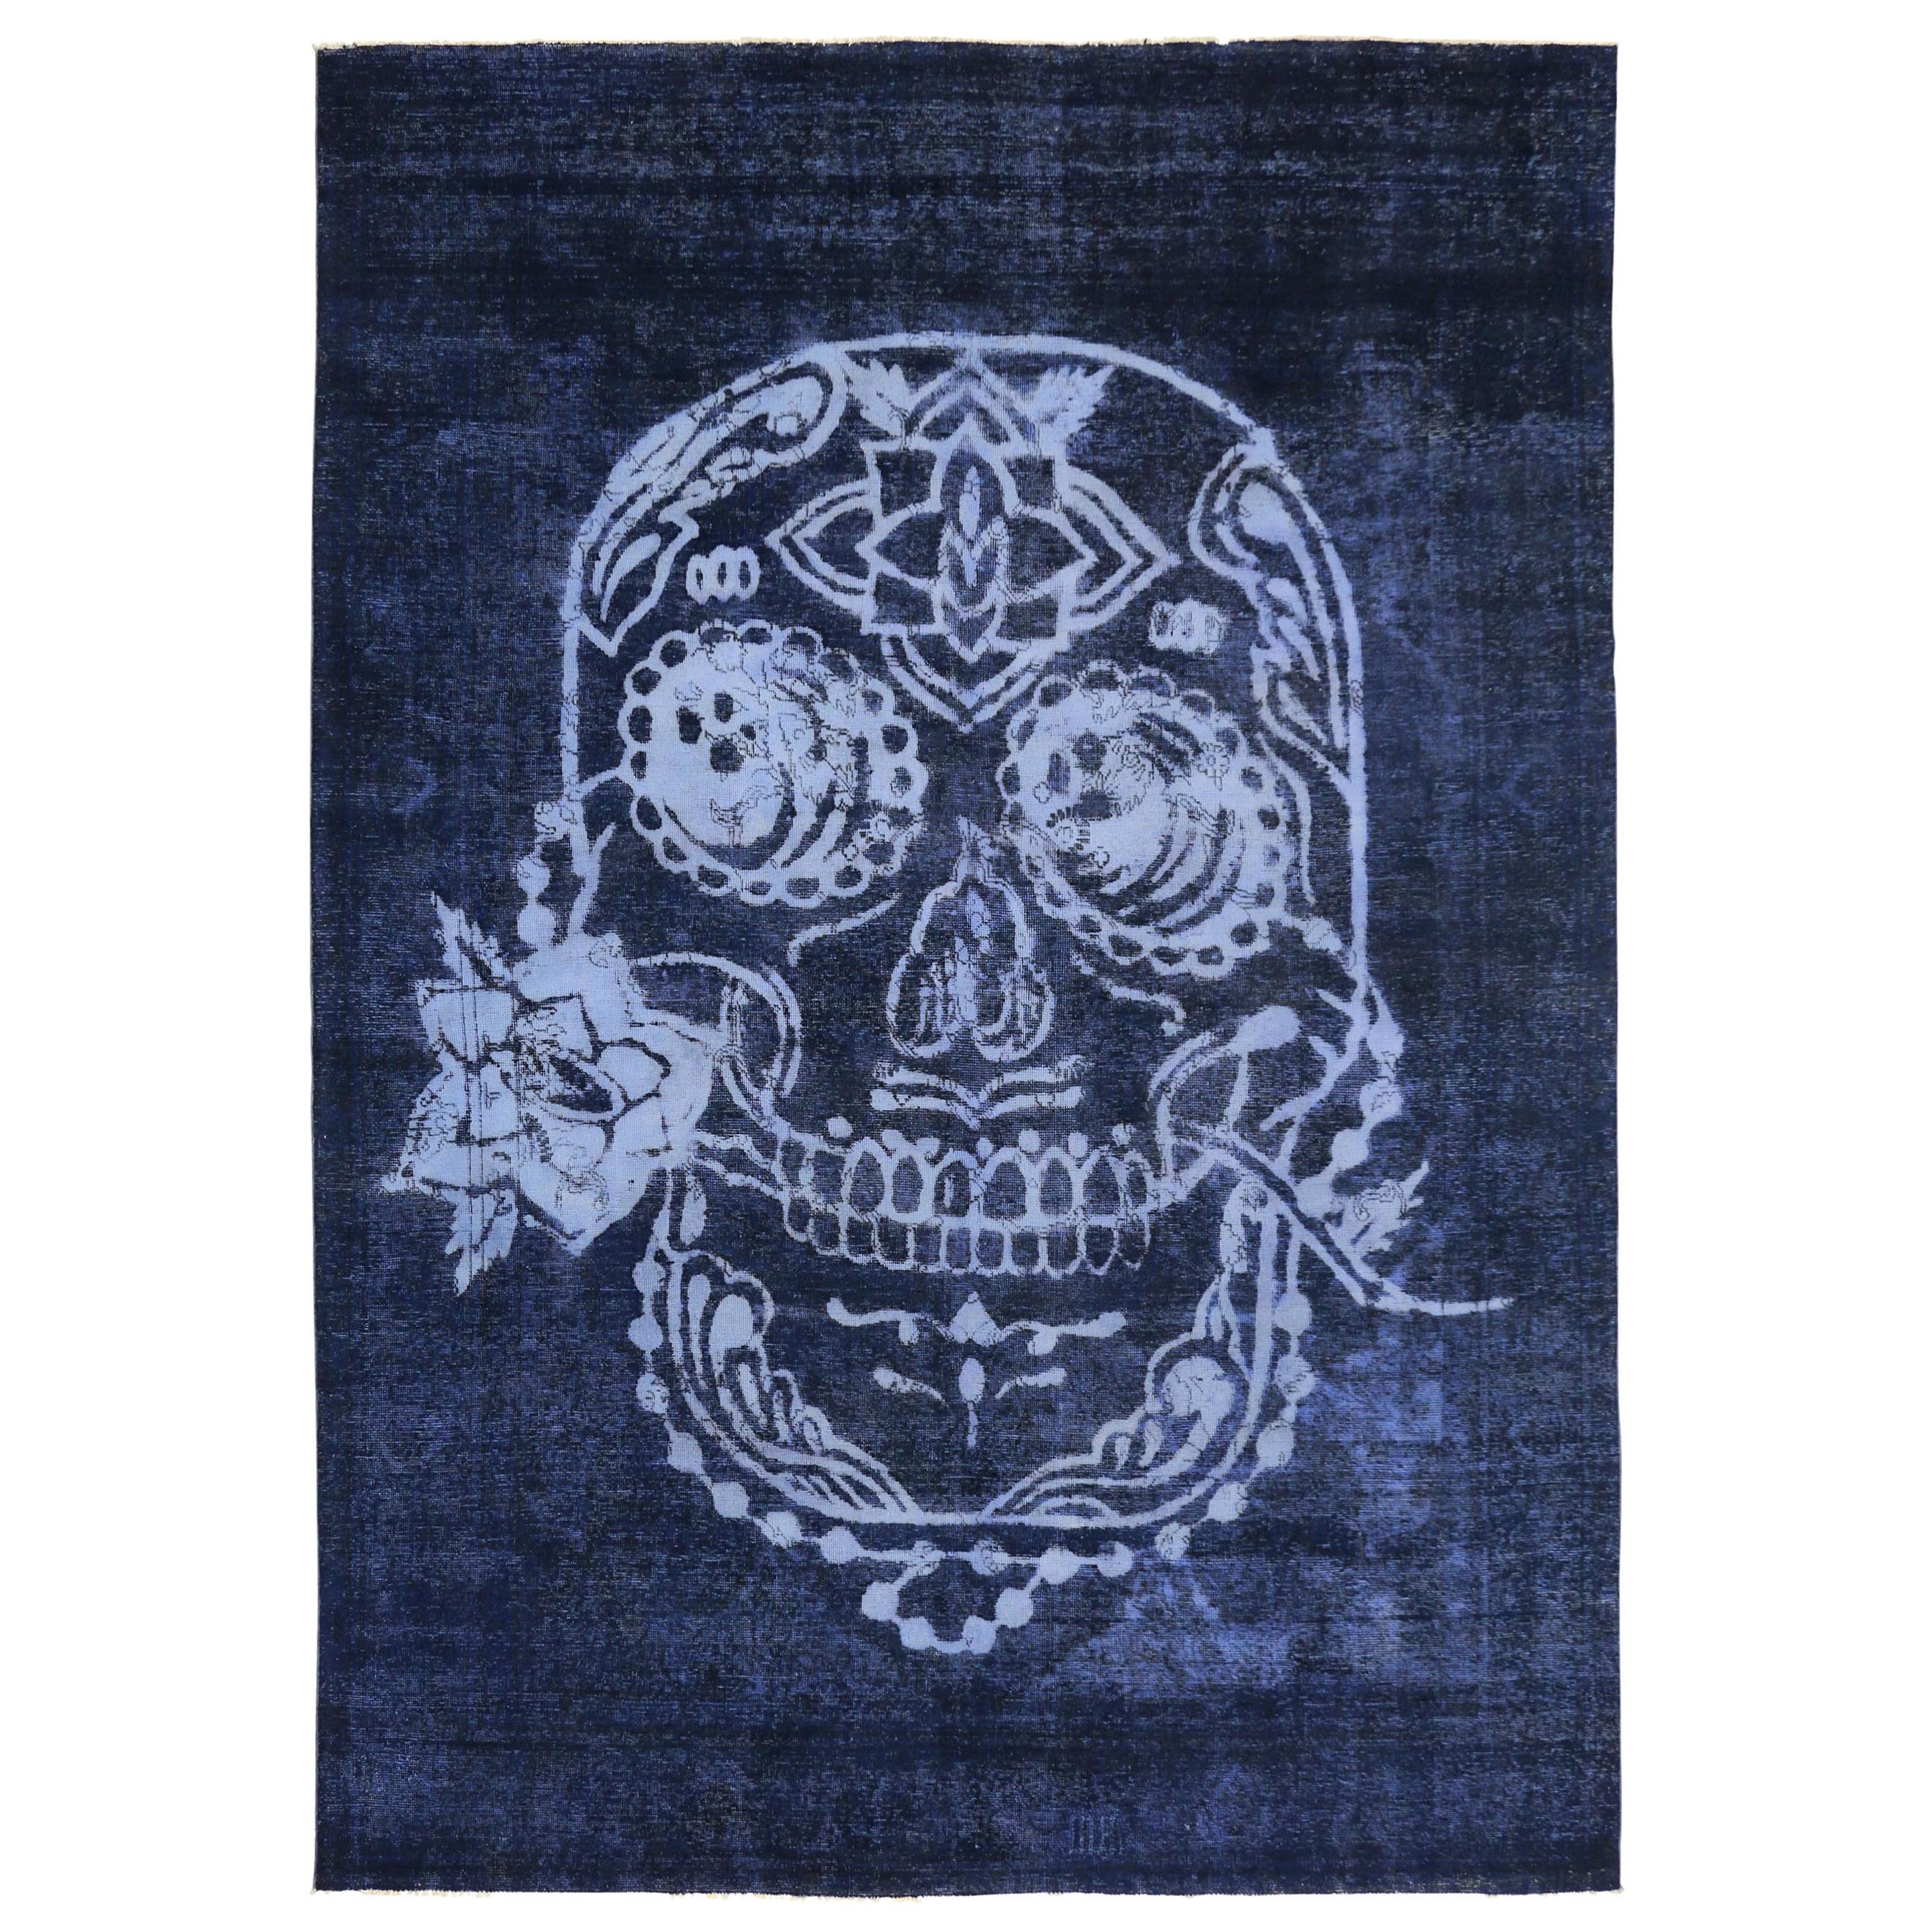 Distressed Vintage Skull Rug Inspired by Alexander McQueen For Sale